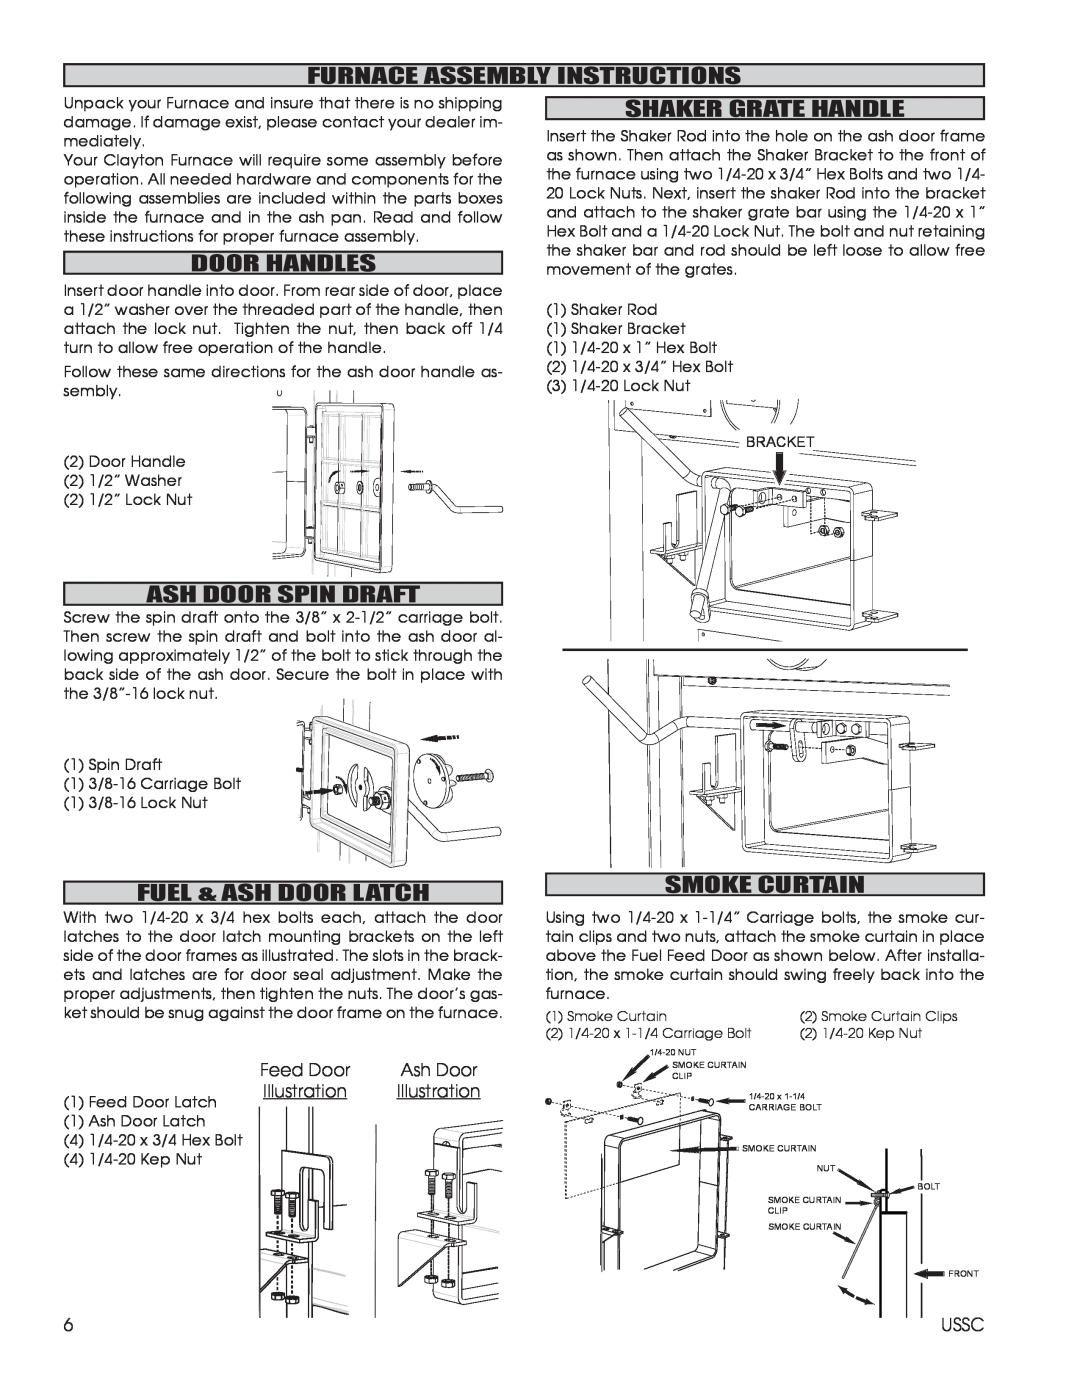 United States Stove 1602M Furnace Assembly Instructions, Shaker Grate Handle, Door Handles, Ash Door Spin Draft 